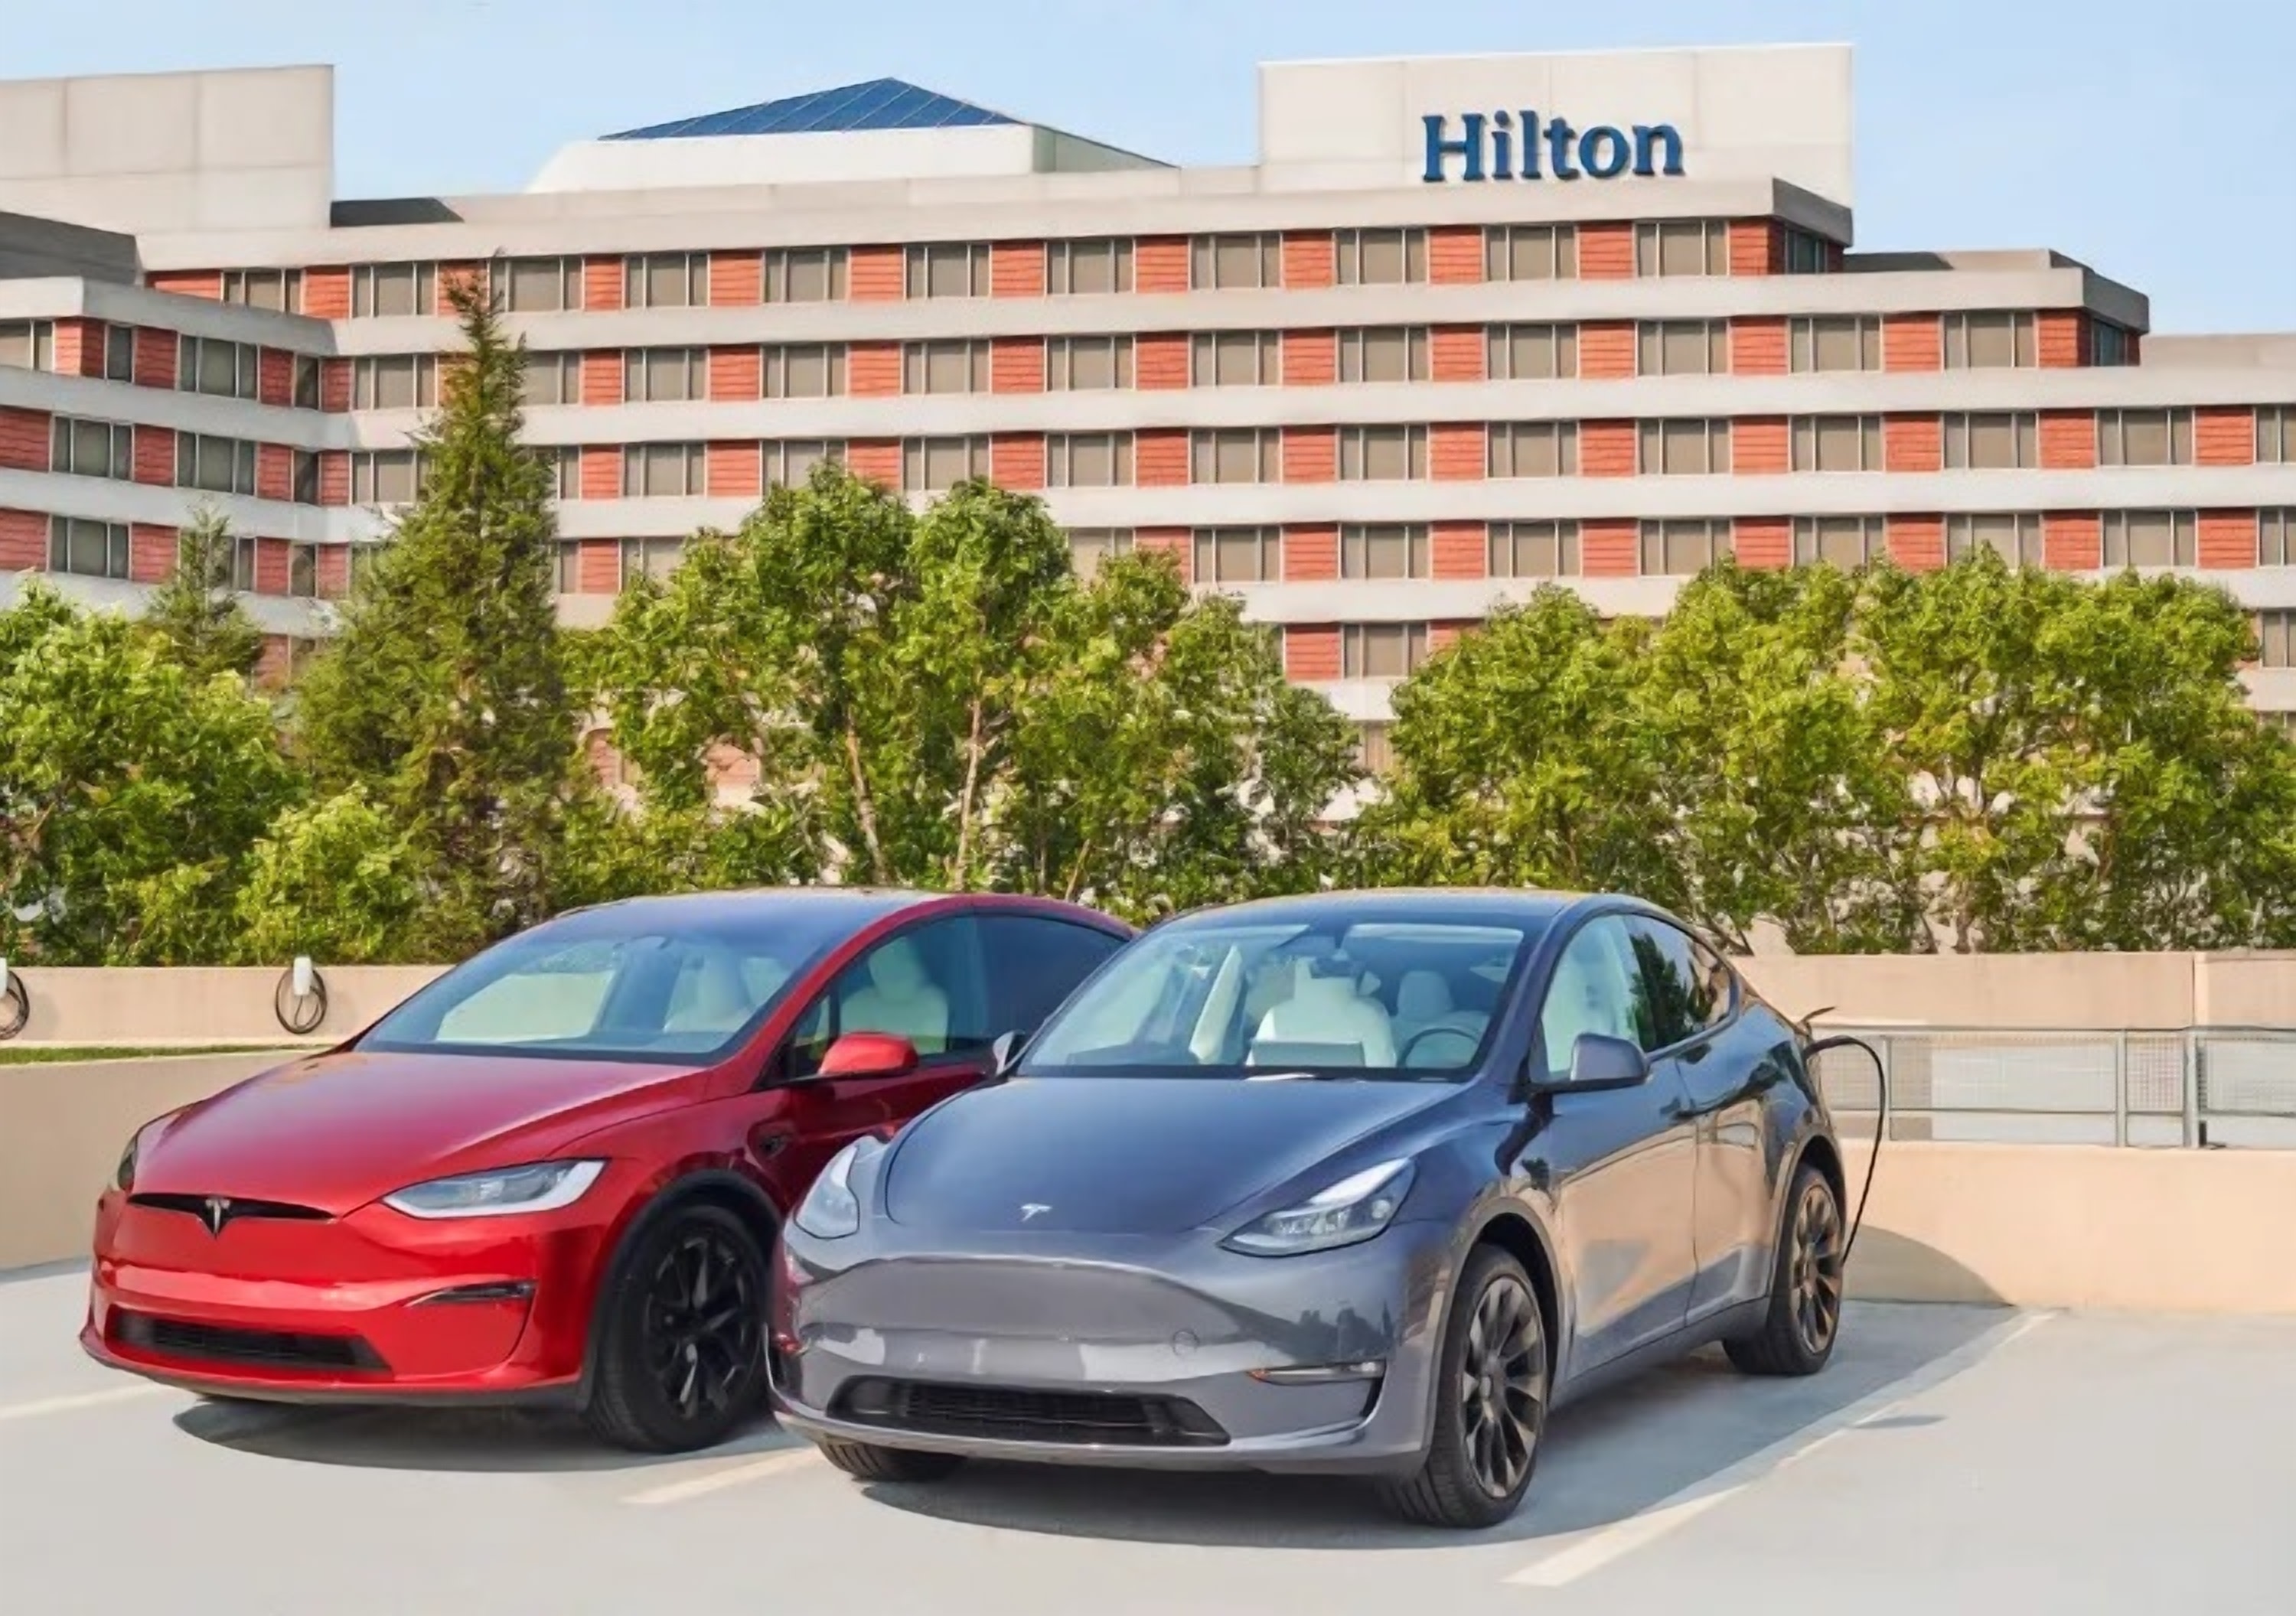 KnowESG_Hilton Partners with Tesla to Install 20,000 Chargers